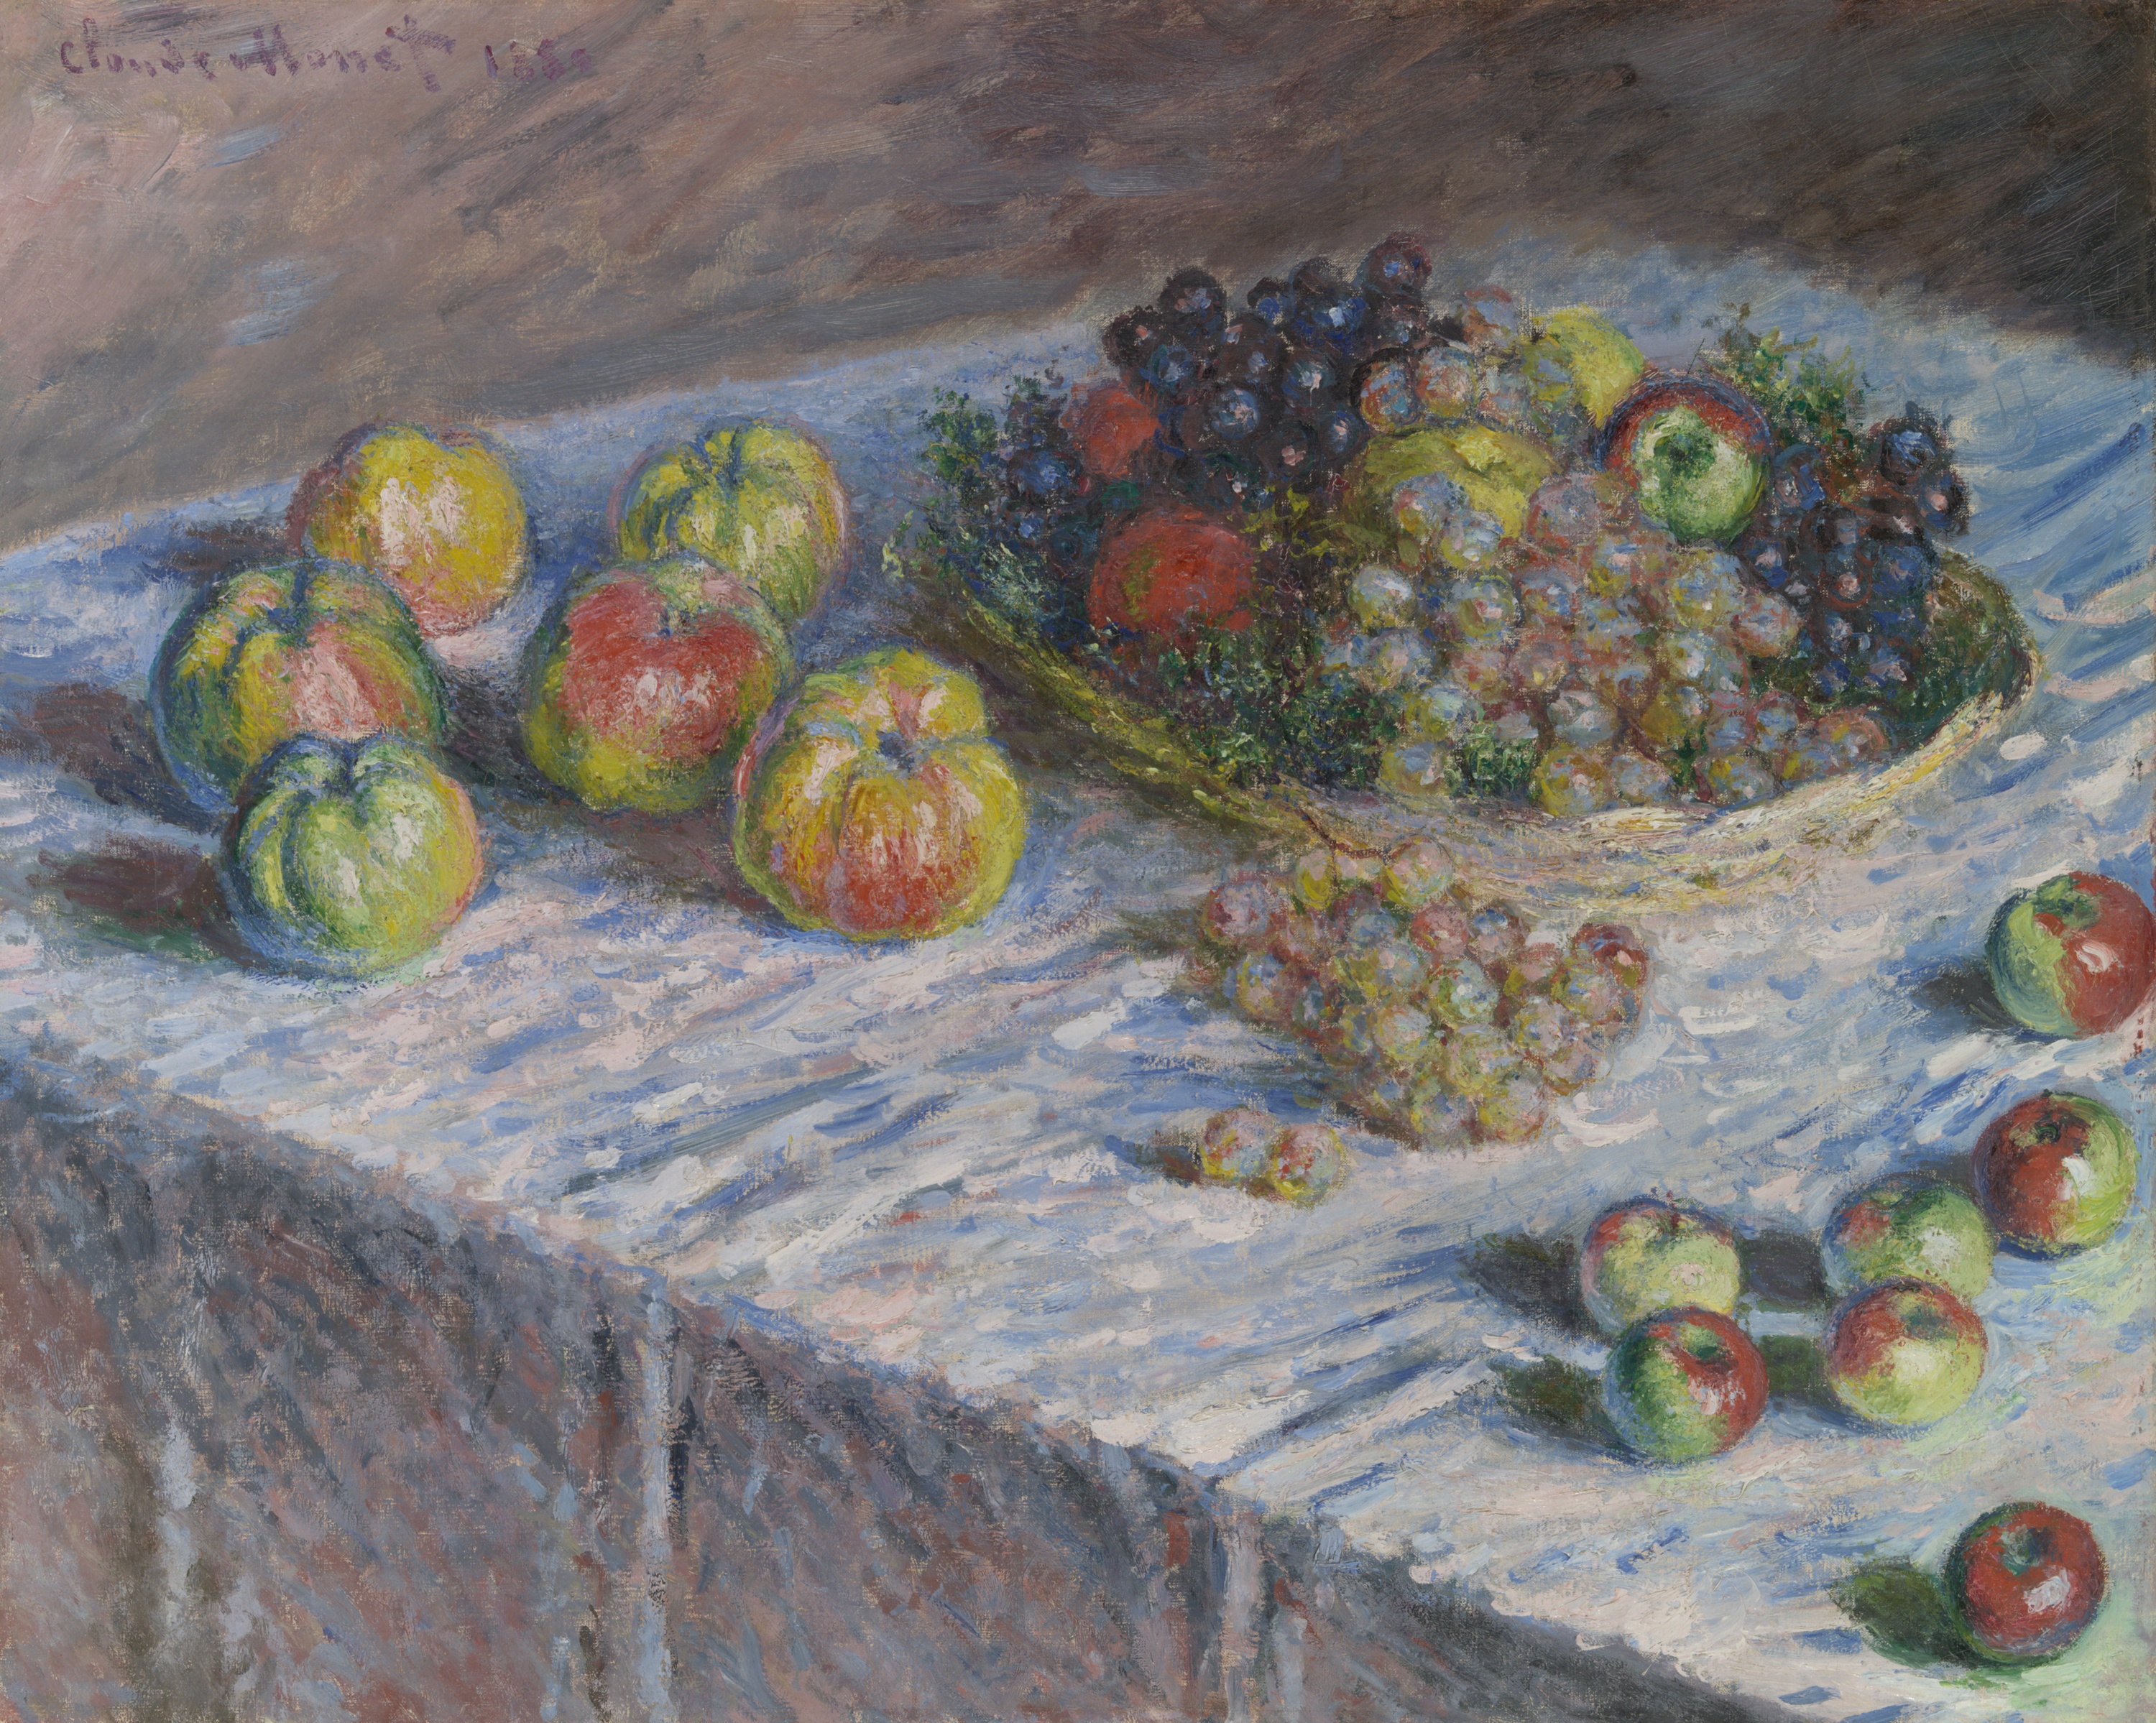 Apples and Grapes by Claude Monet - 1880 - 66.5 × 82.5 cm Art Institute of Chicago